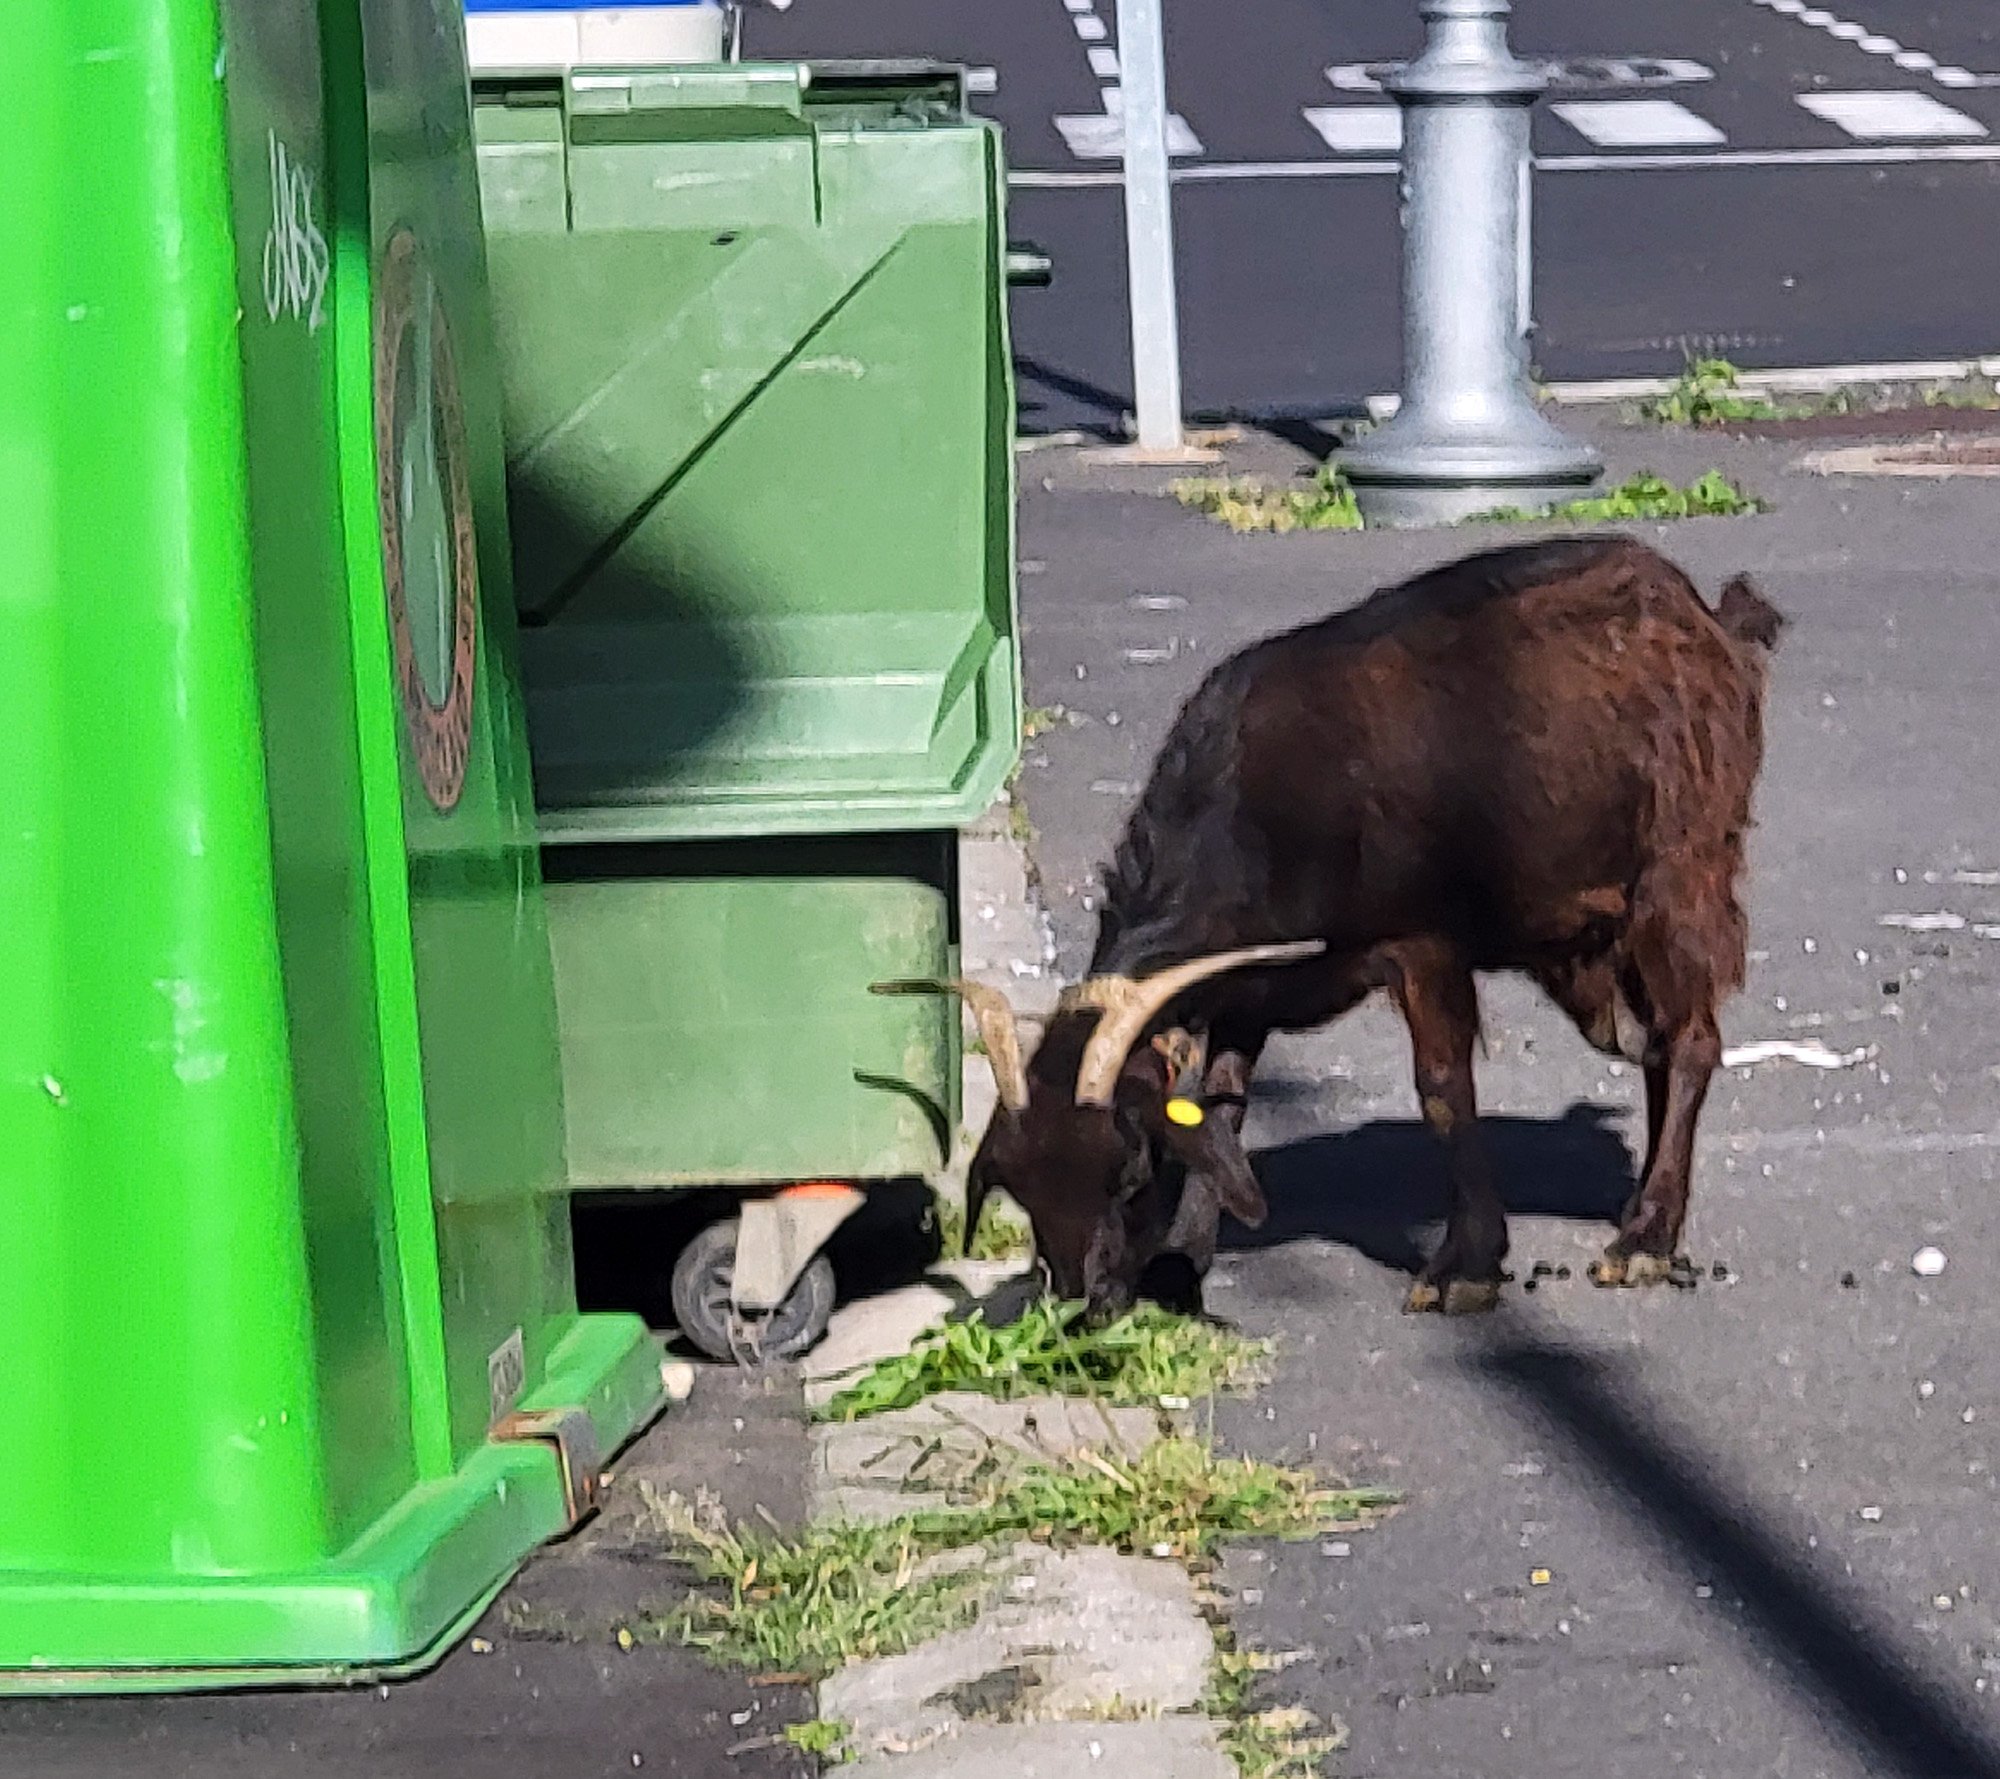 Back to town and the goat team had moved! This one was nibbling near some delicious trash to add refined aromas to its expensive artisan cheese.